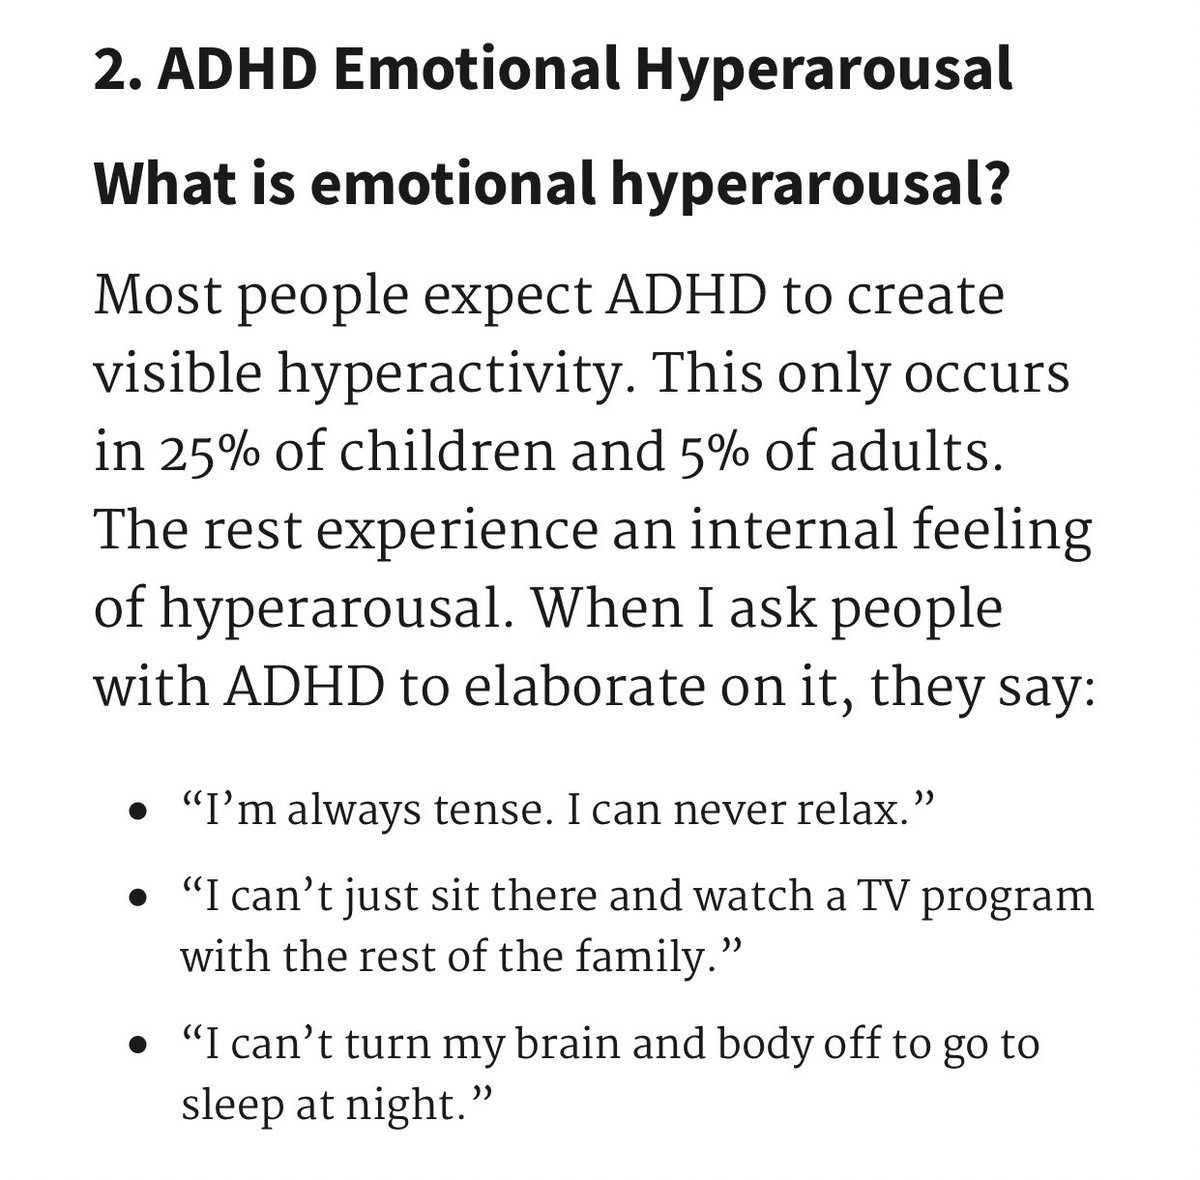 2. emotional hyperarousal while my body might not appear hyperactive, my brain is constantly running at full speed with thoughts, ideas, and often with anxiety (related to how long it takes me to do things compared to people around me). sometimes this manifests in fidgeting!